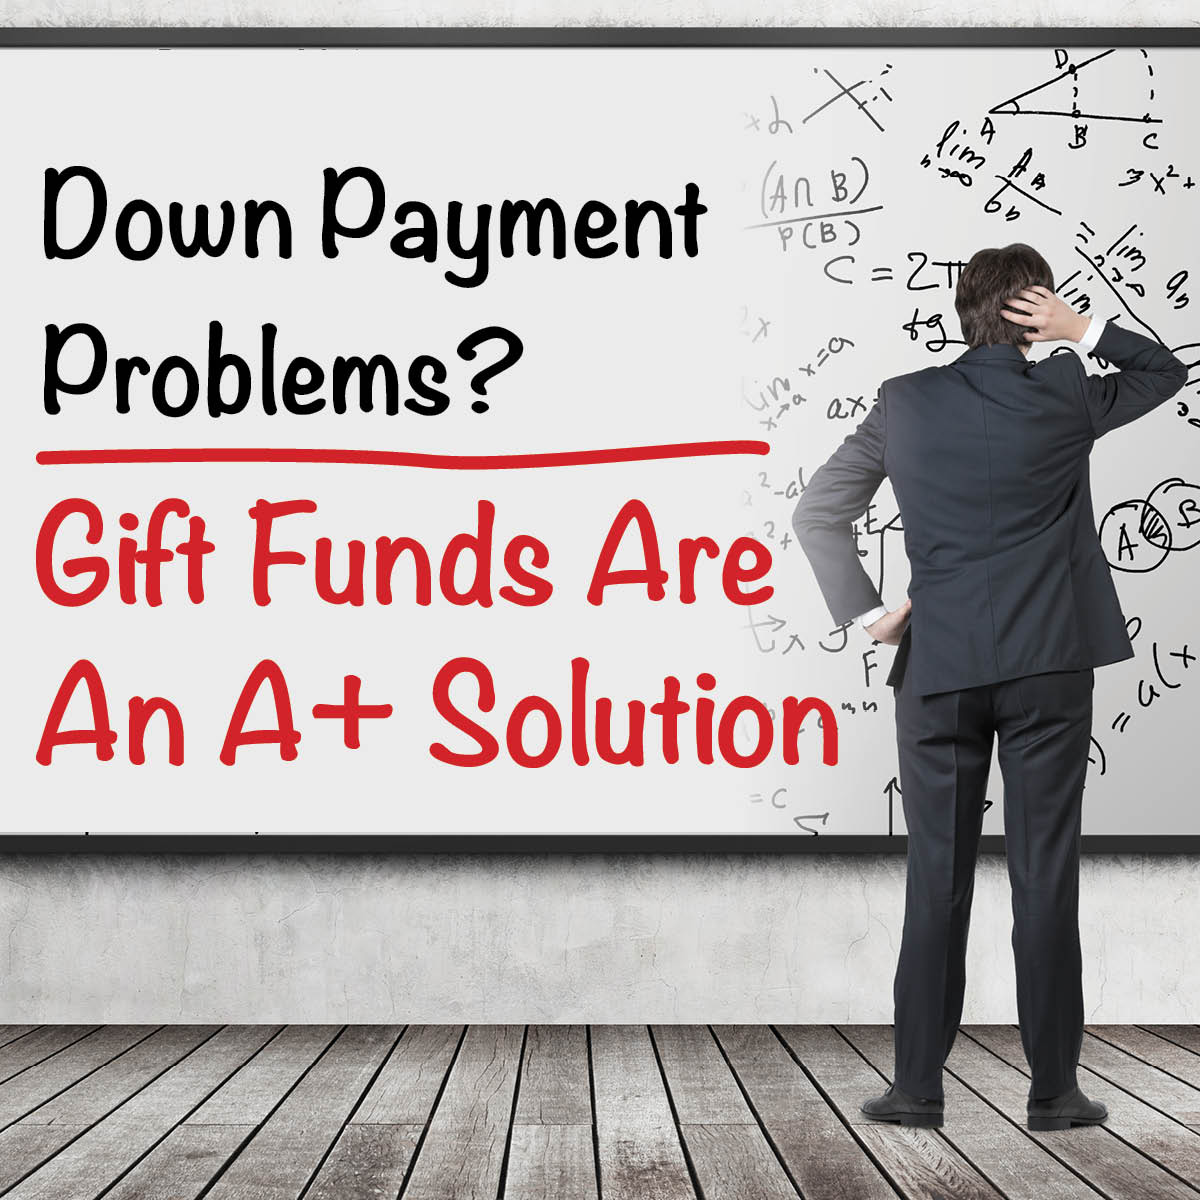 Using gift funds is always a good answer! If you received money during the holidays, you can put it toward your down payment and bring your monthly payments to a happier place in NJ or NY. Ask Ted for details call 877-539-1697. #njrealestate #njhomes #newyorkhomes #nyhomes